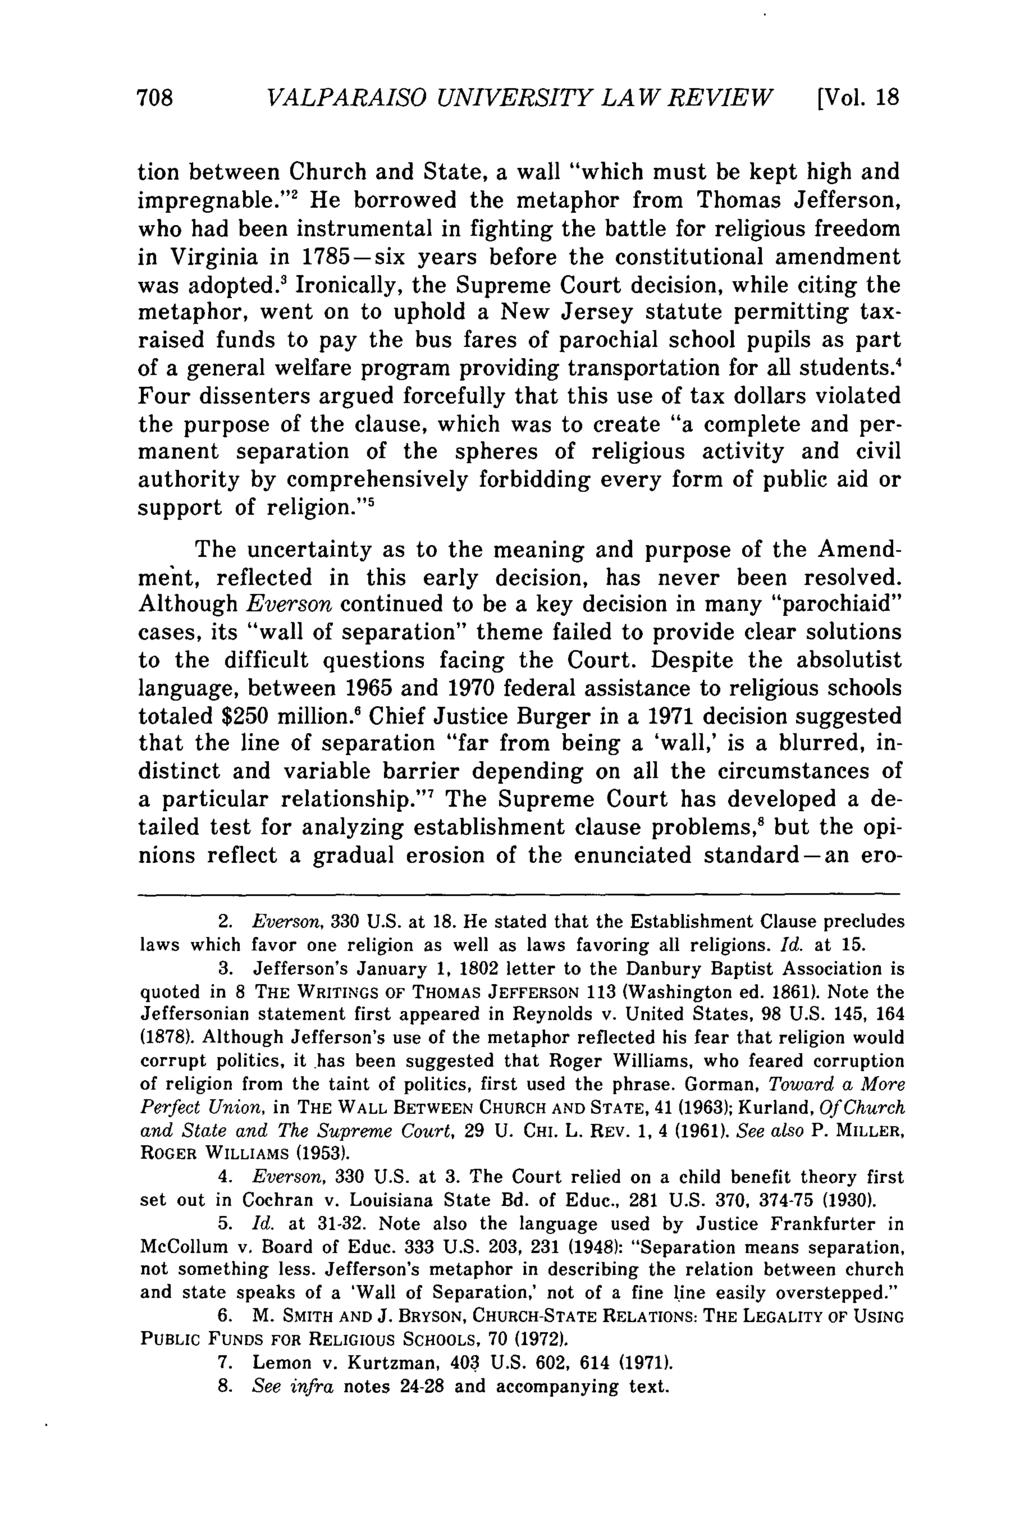 Valparaiso University Law Review, Vol. 18, No. 4 [1984], Art. 1 708 VALPARAISO UNIVERSITY LAW REVIEW [Vol. 18 tion between Church and State, a wall "which must be kept high and impregnable.